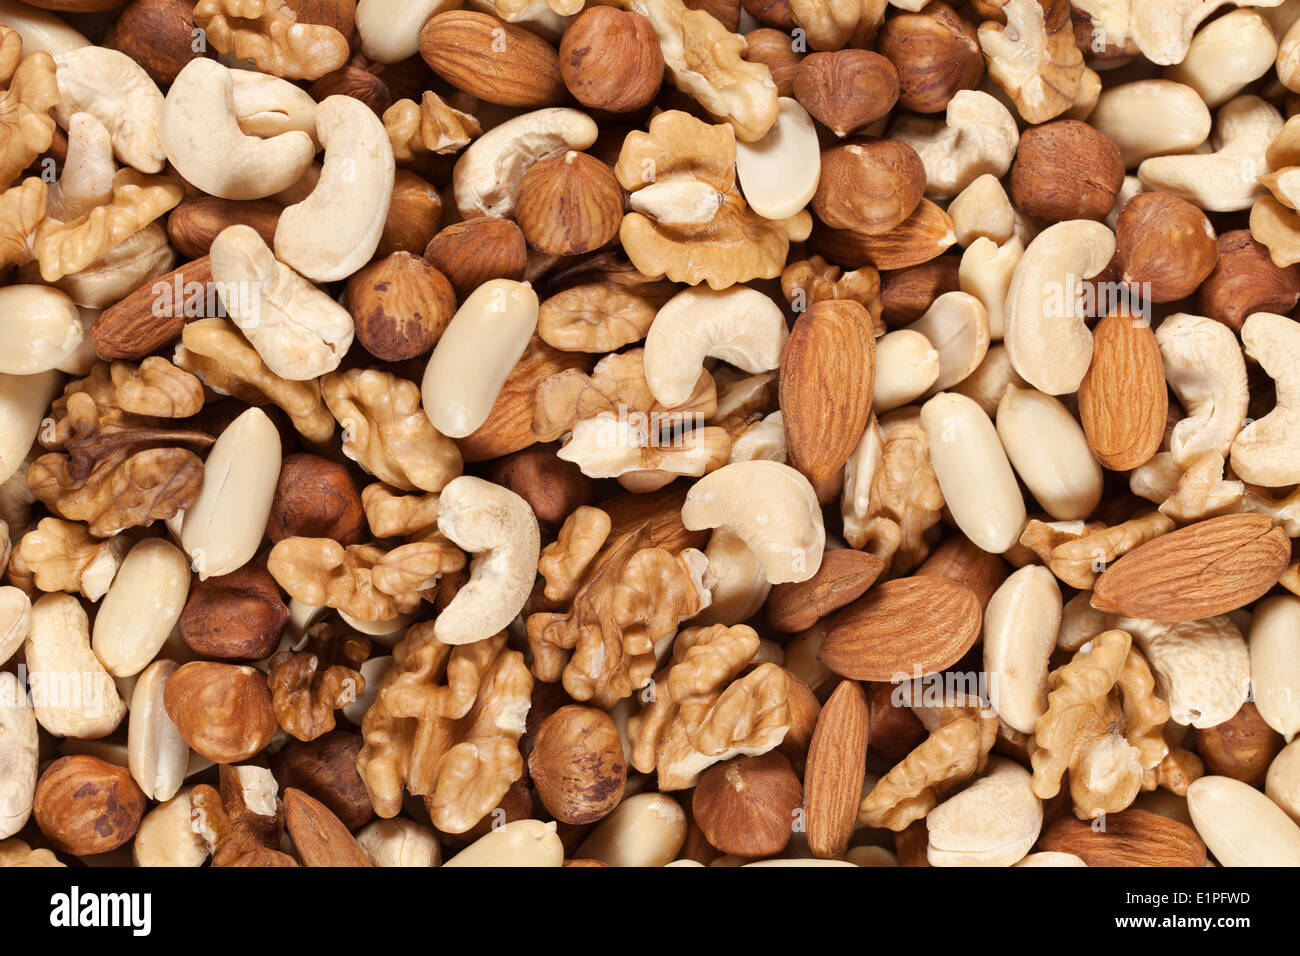 Collection of nuts such as peanuts, walnuts, almonds, hazelnuts, Brazil nuts and Macadamias forming a background Stock Photo